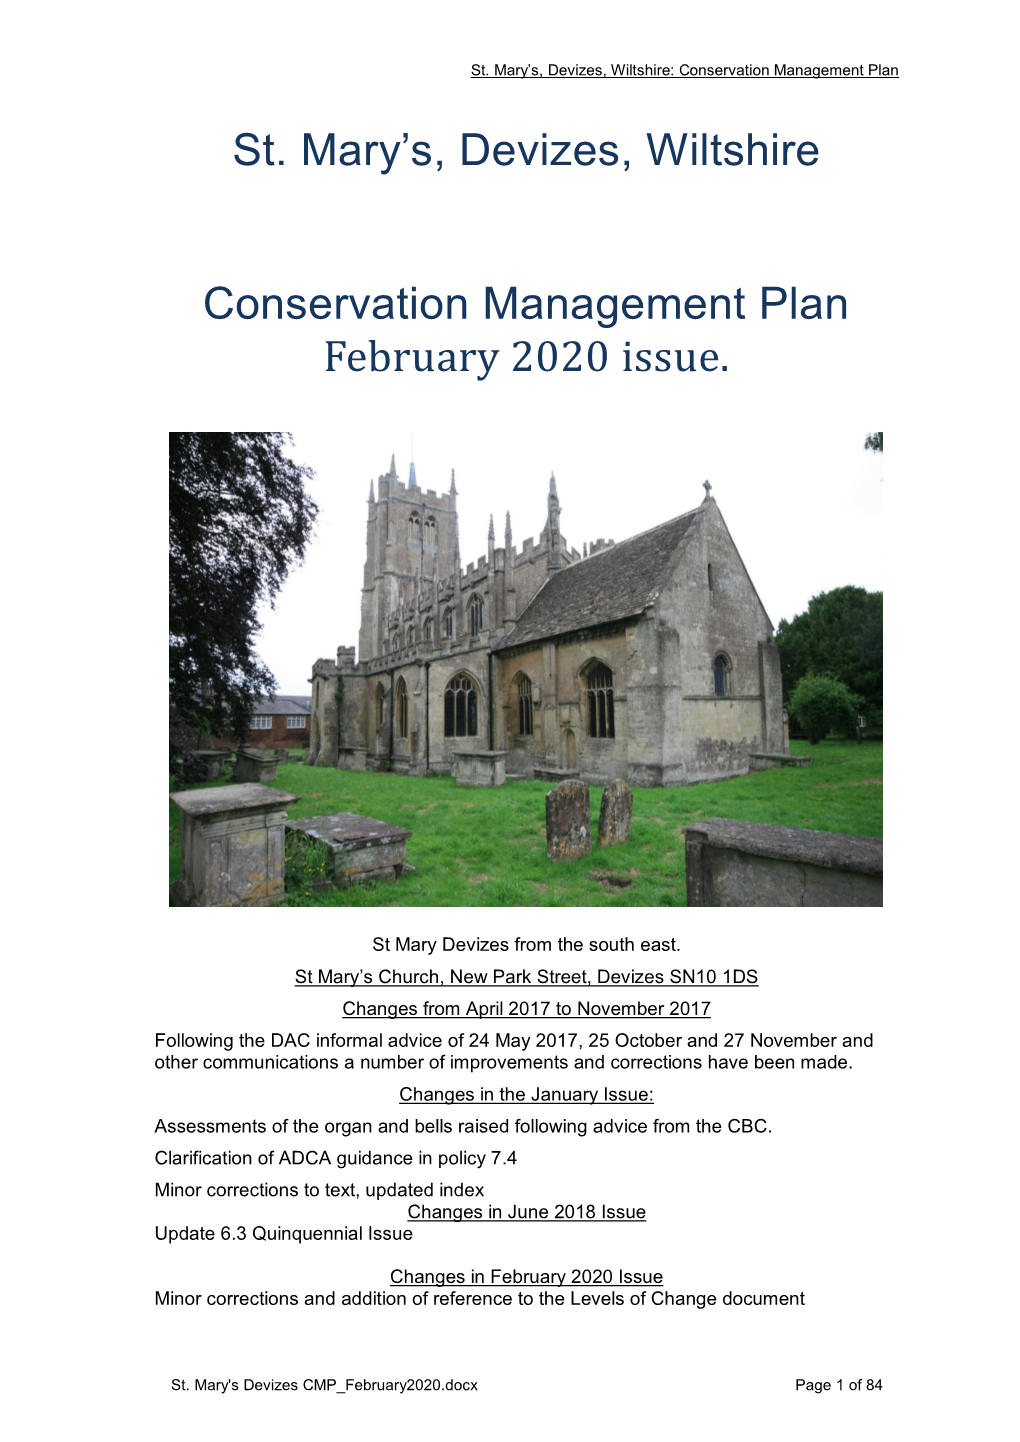 St. Mary's, Devizes, Wiltshire Conservation Management Plan February 2020 Issue